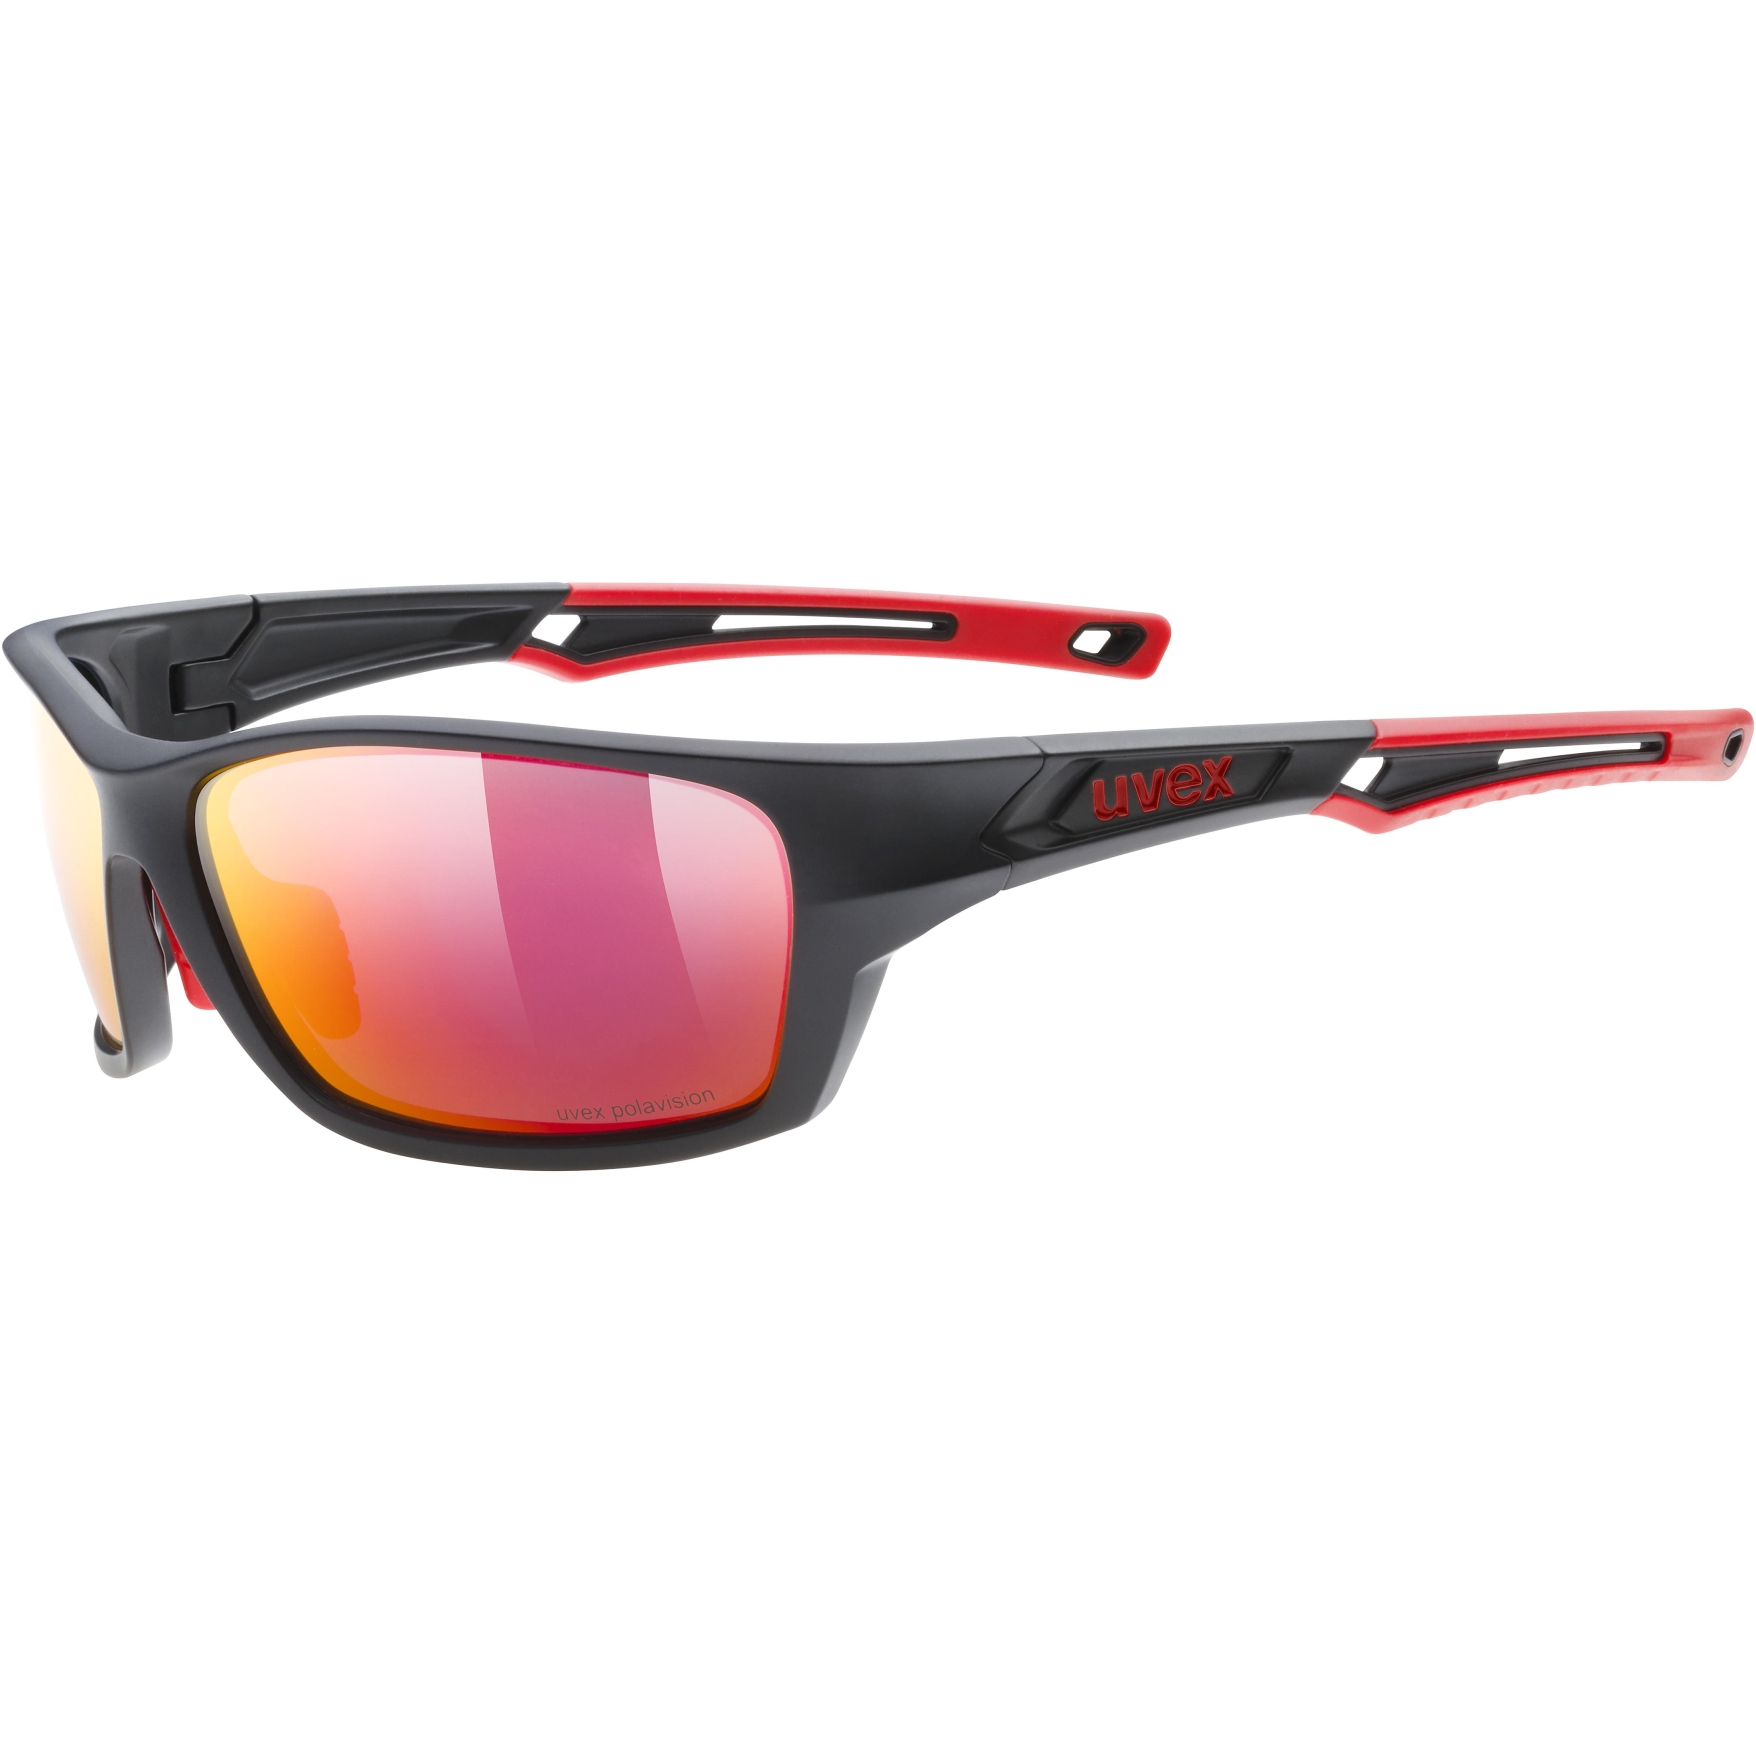 Image of Uvex sportstyle 232 P Glasses - black mat red/polavision mirror red